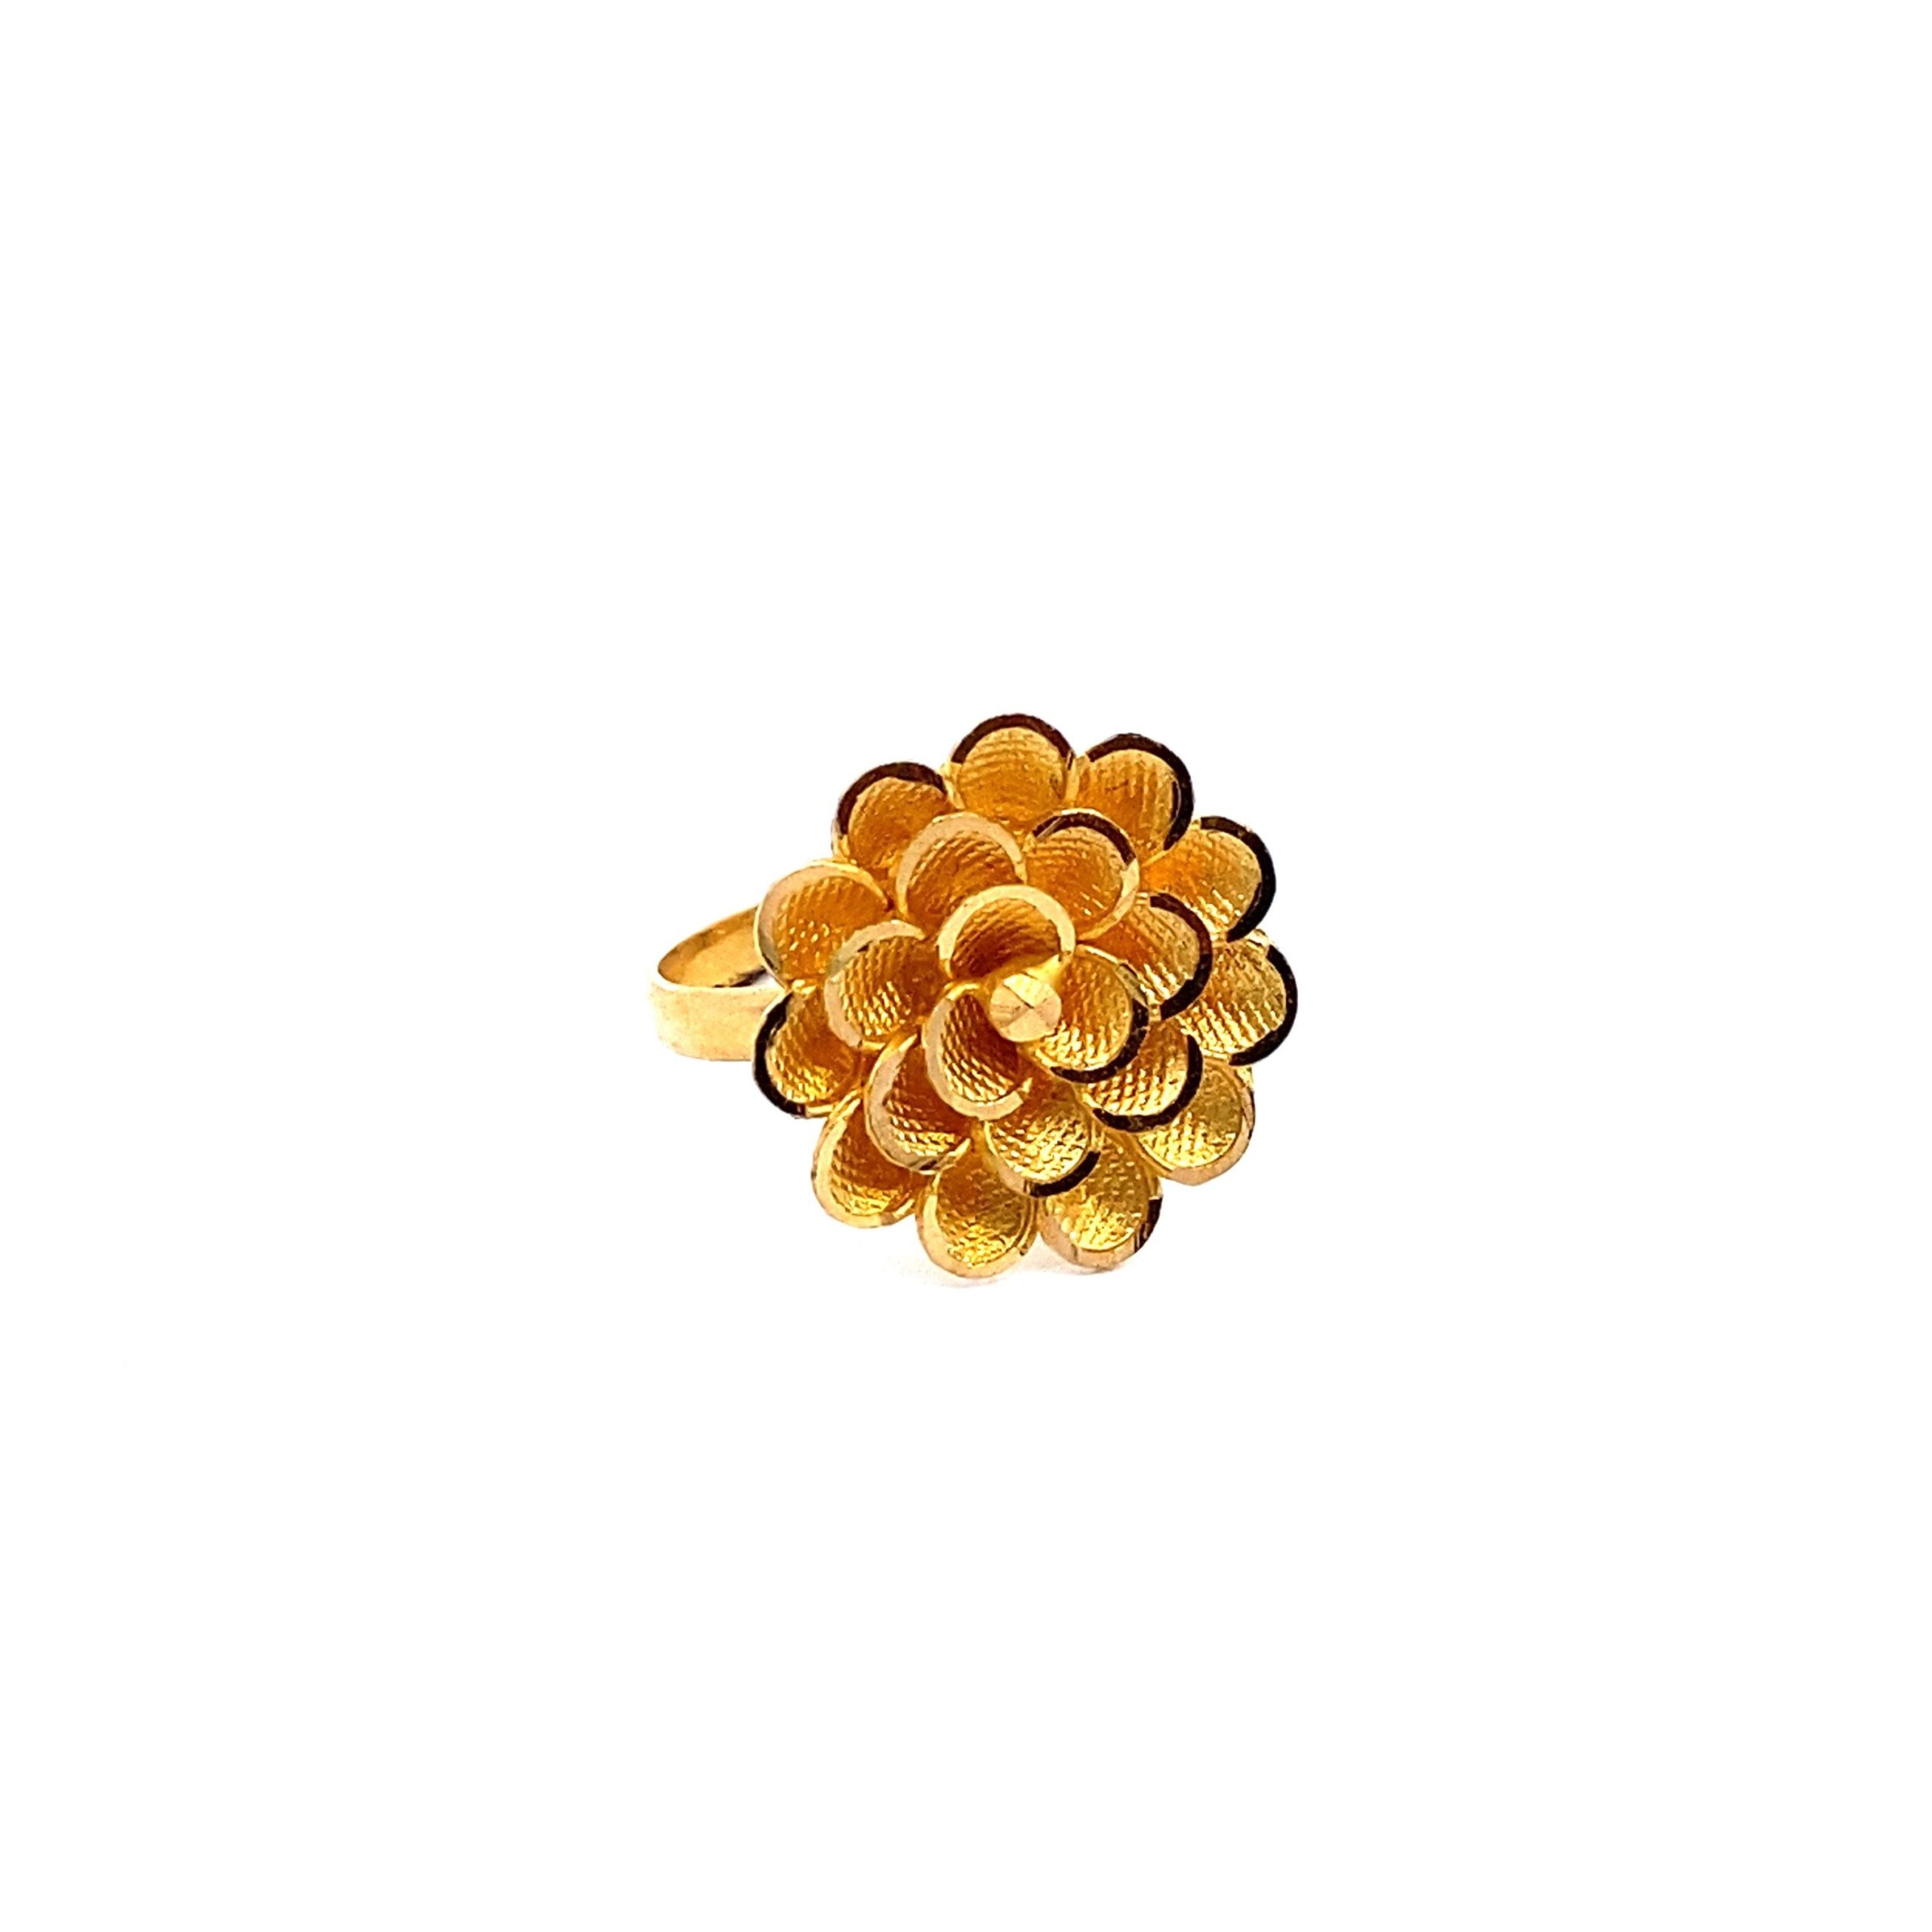 August Birth Flower Ring | Gold Vermeil | Birth Flower Ring – Made By Mary